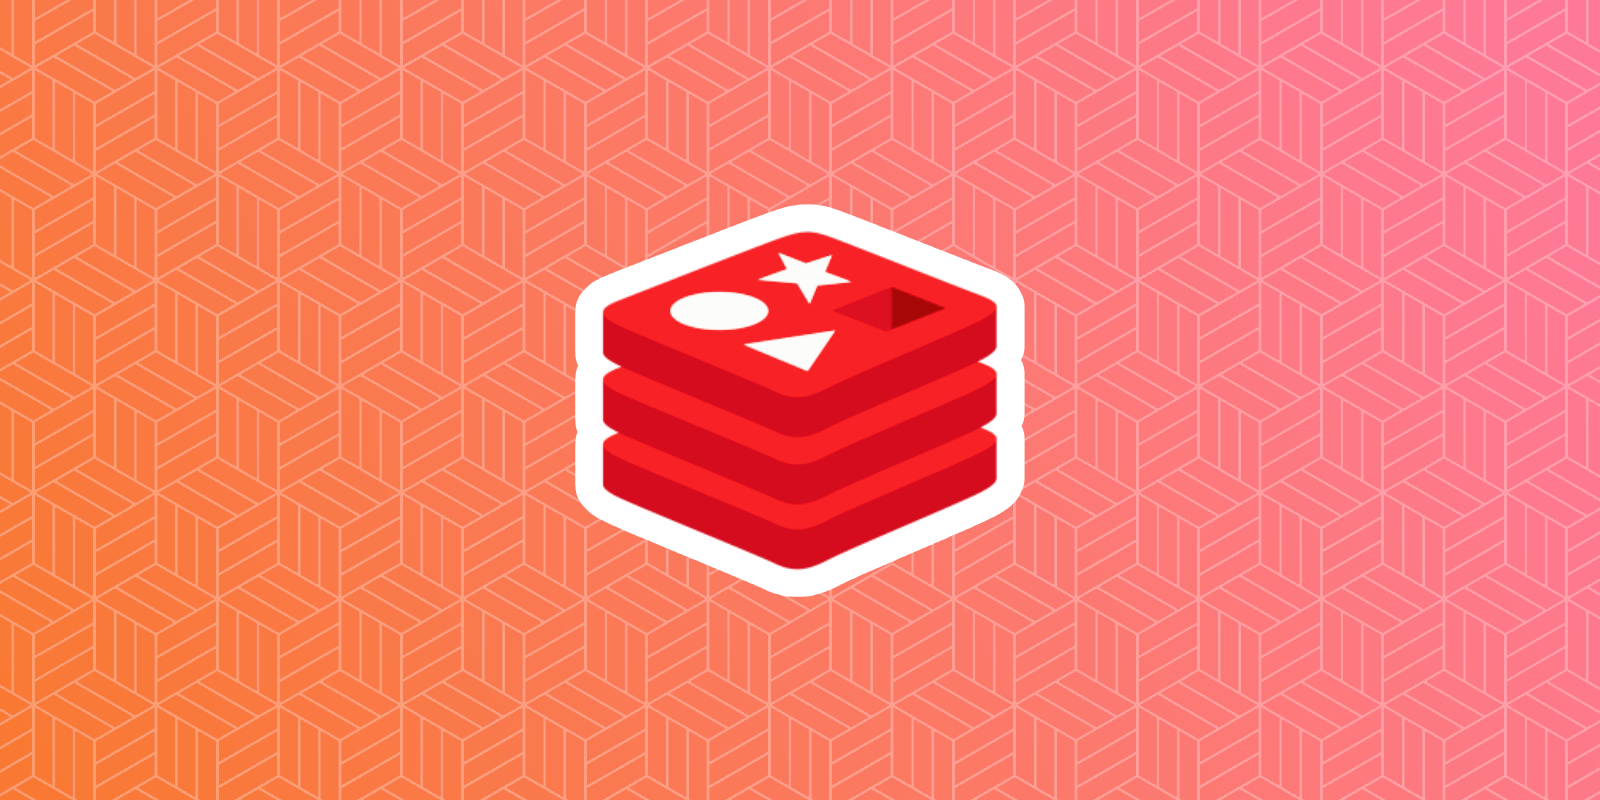 cover image for post - Adding Redis and Sidekiq to your Ruby on Rails app